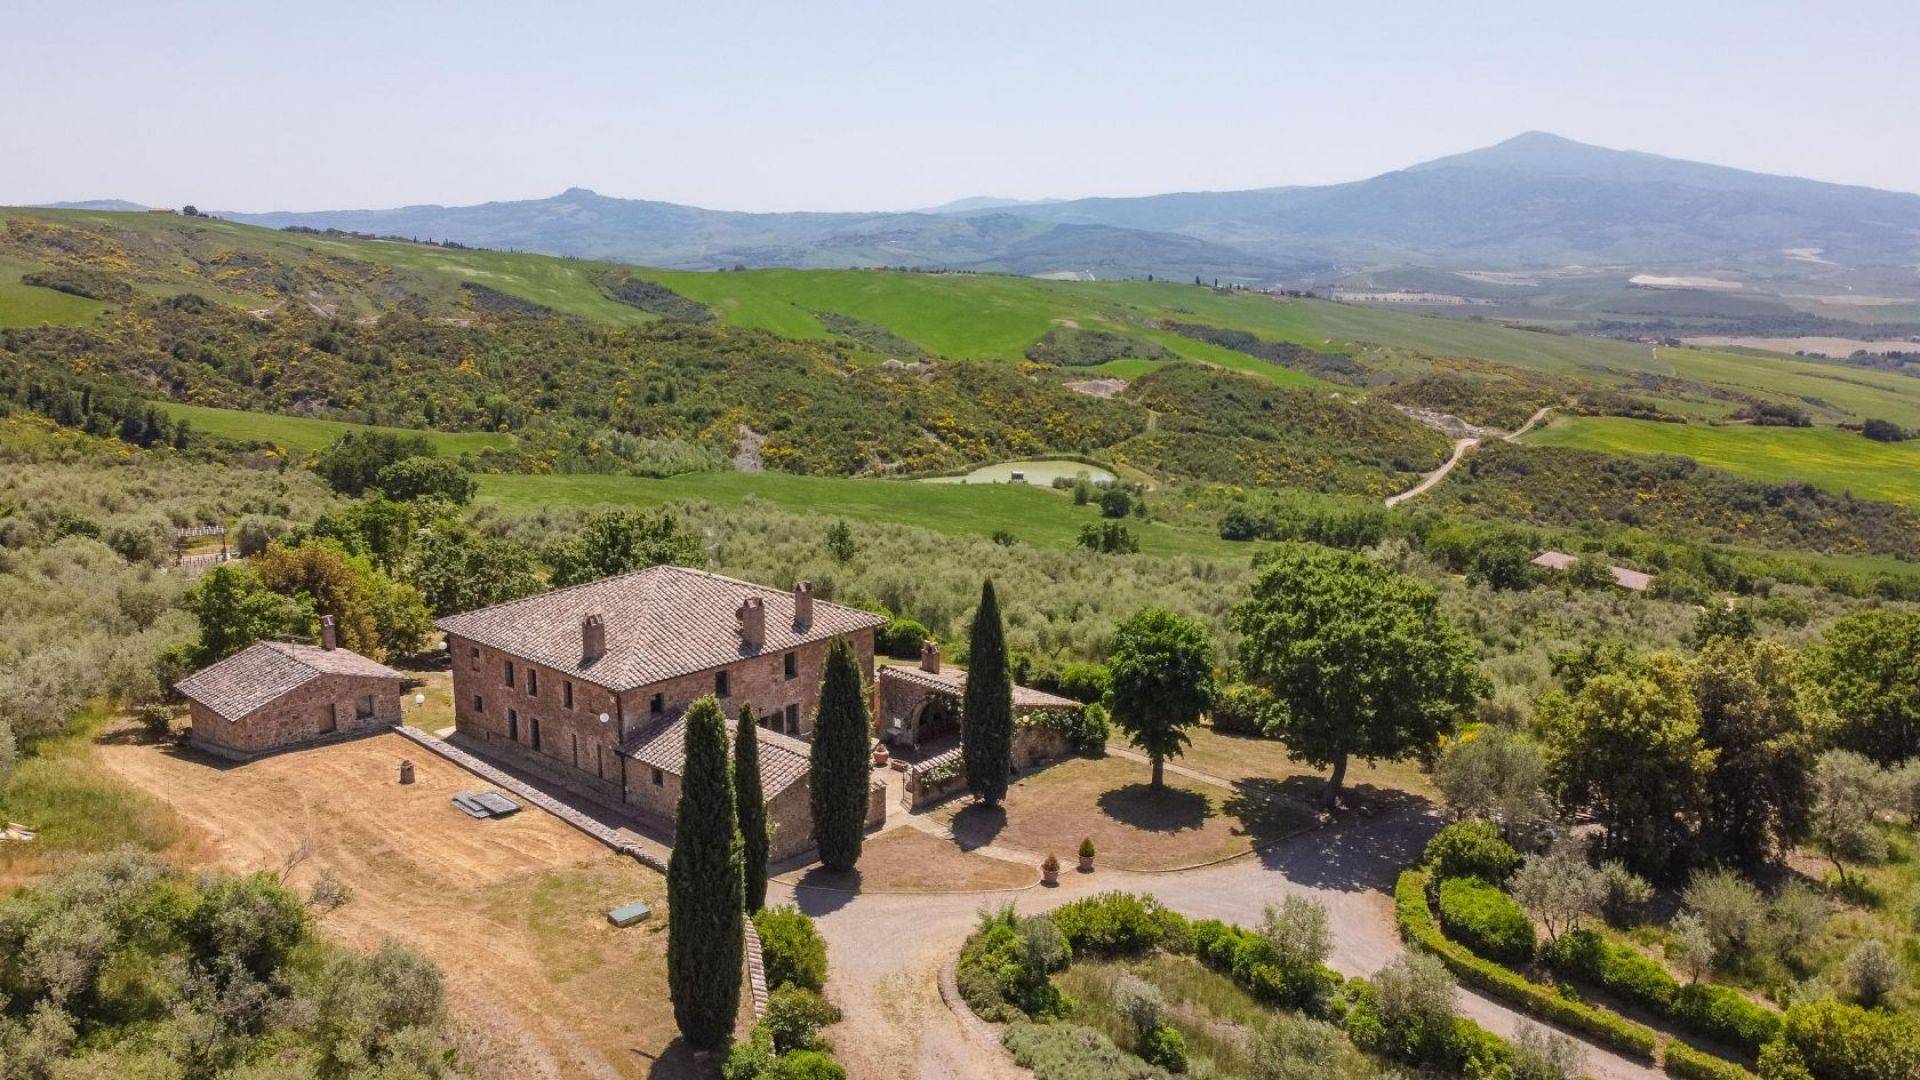 Exclusive sale: 568 acres farmstead with country house, swimming pool and land for sale in Pienza, Siena.